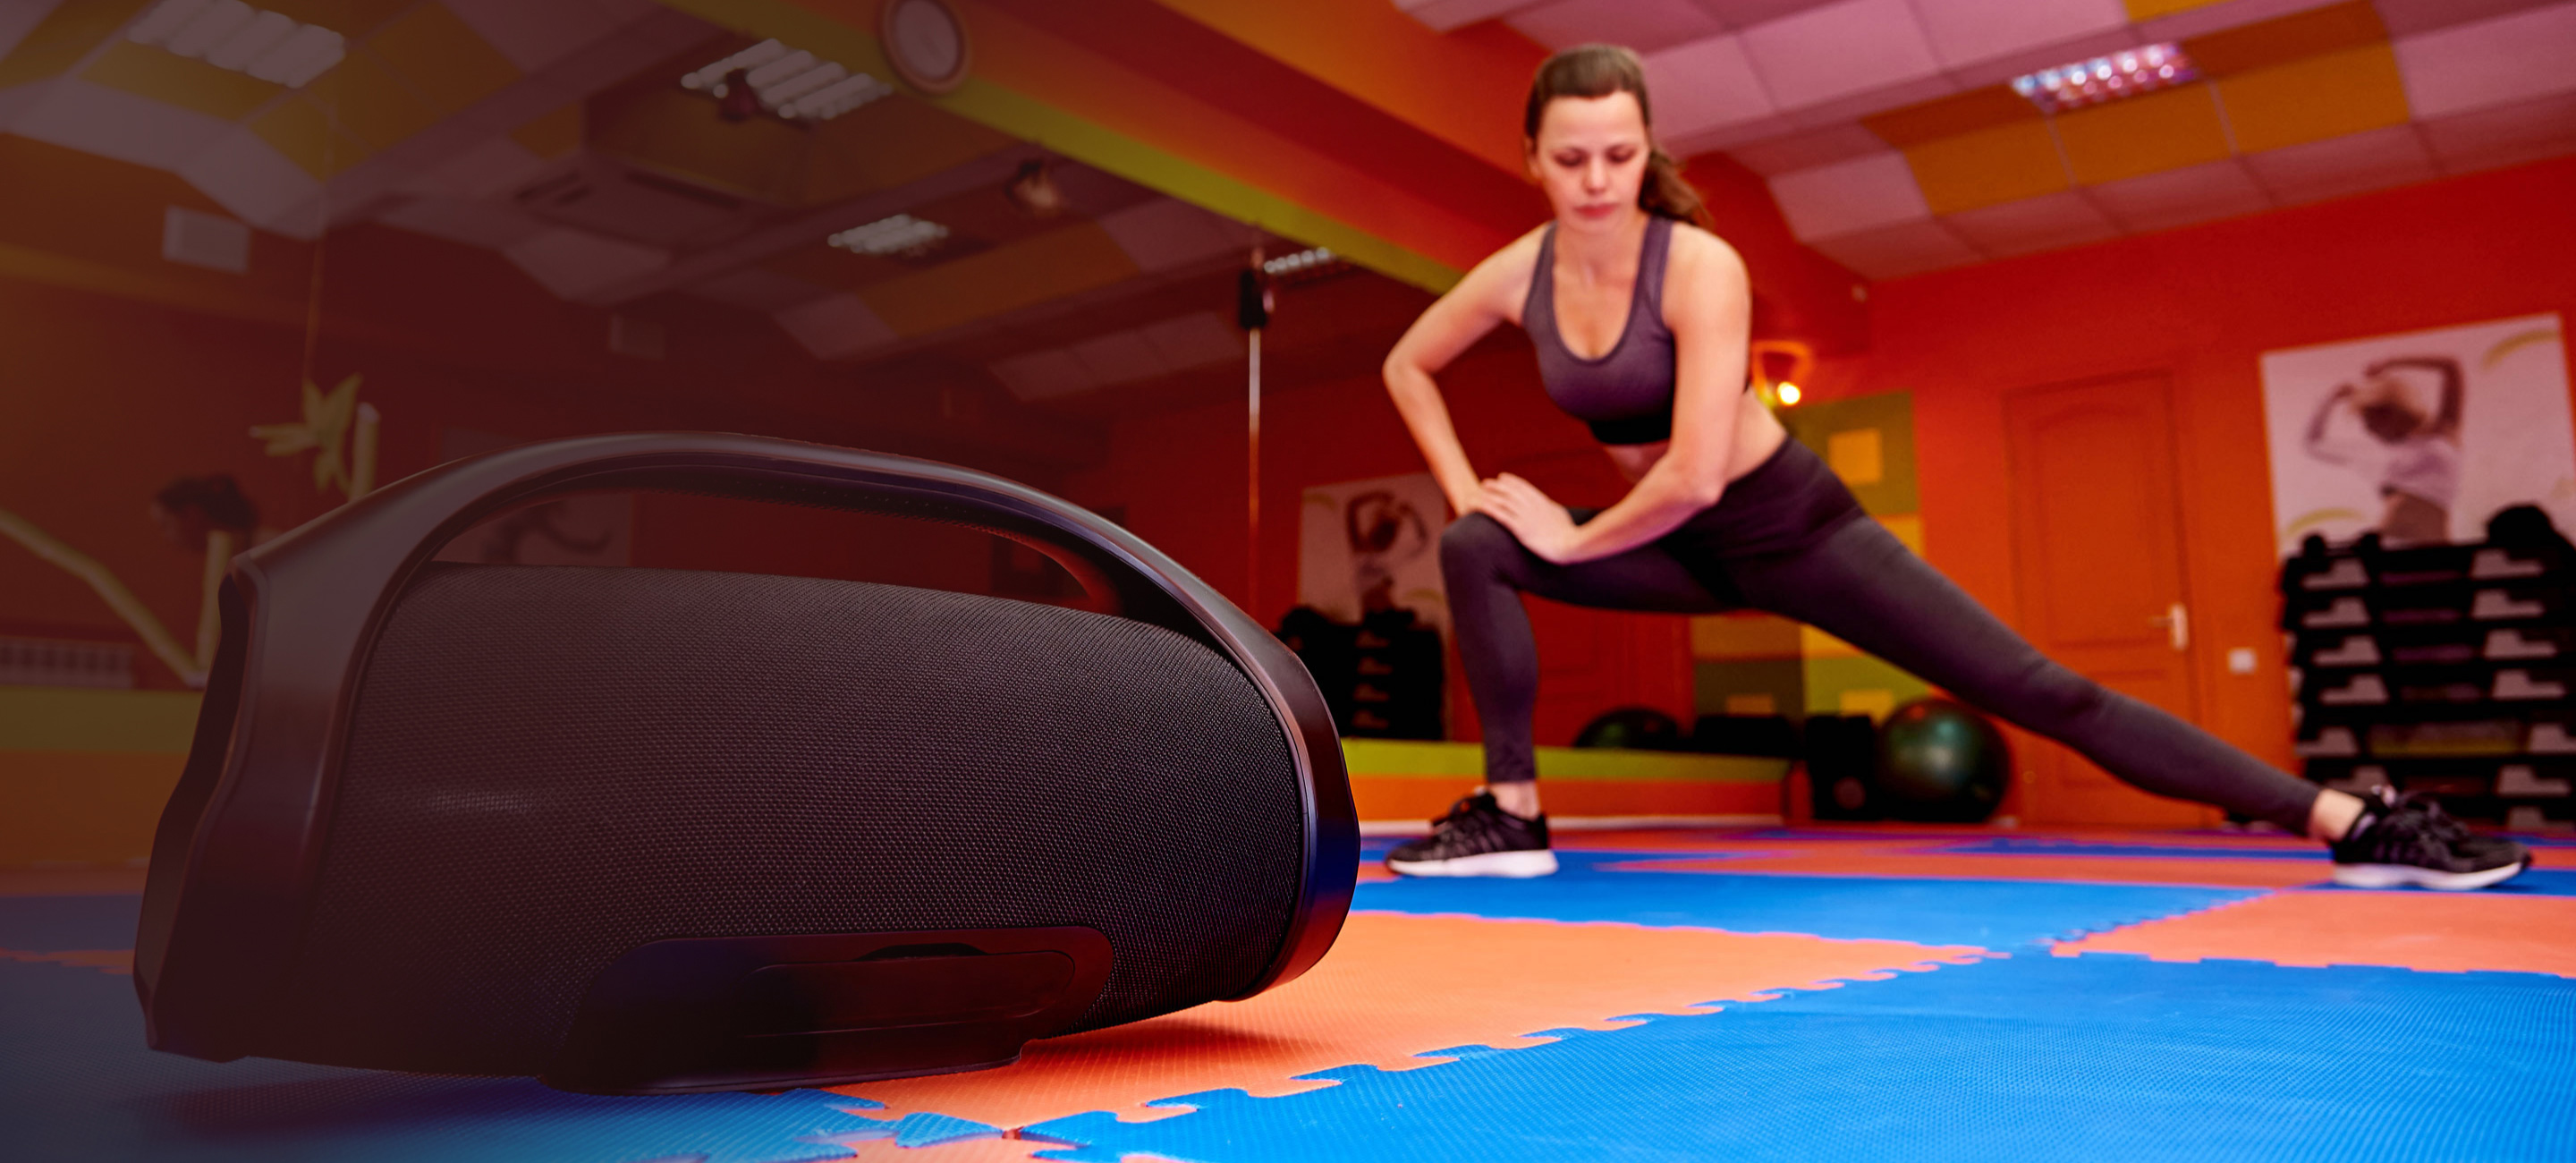 woman doing exercise, a Bluetooth speaker on the floor